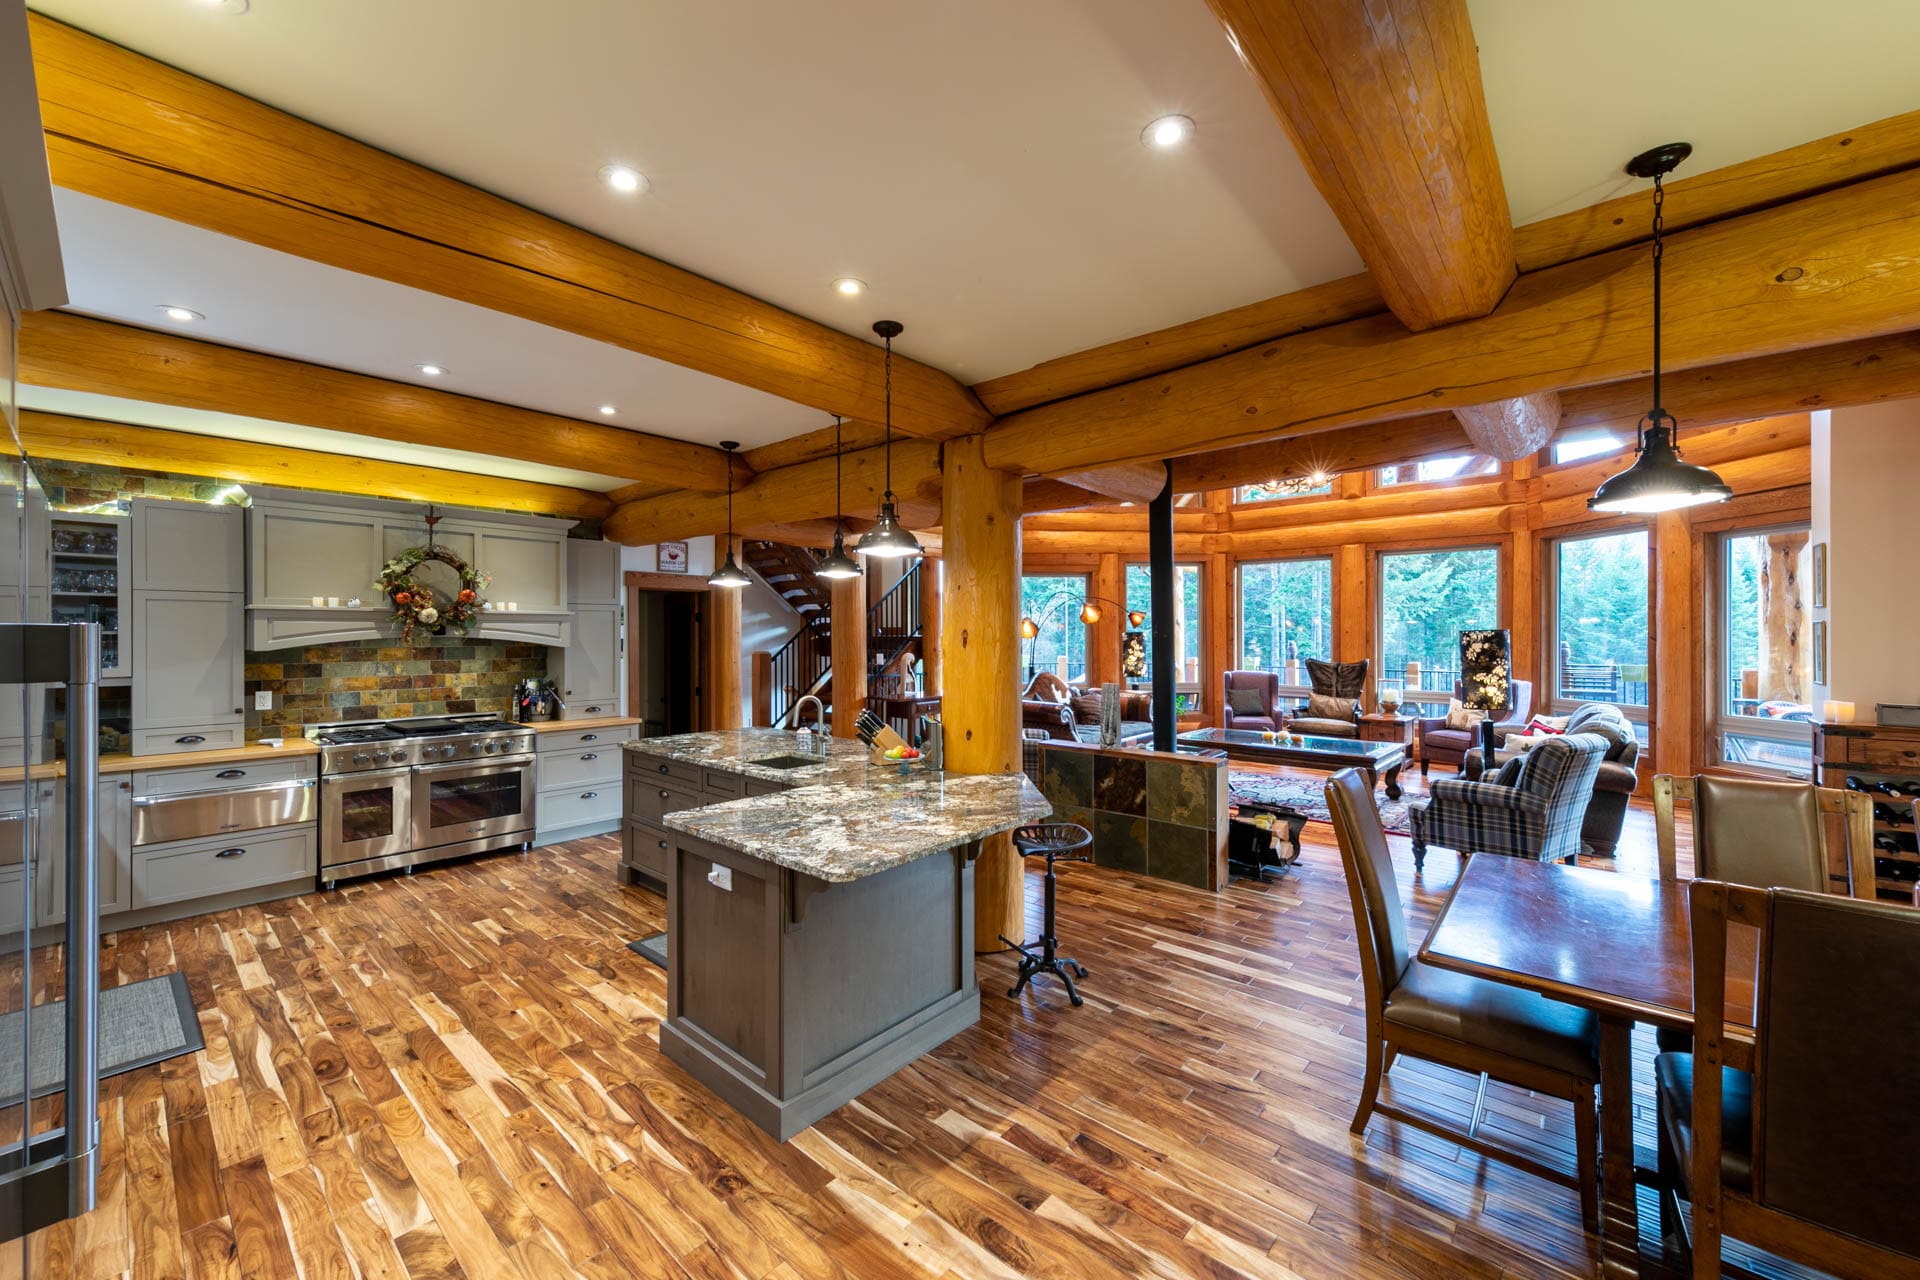 Kitchen and living area of post and beam log home custom built.